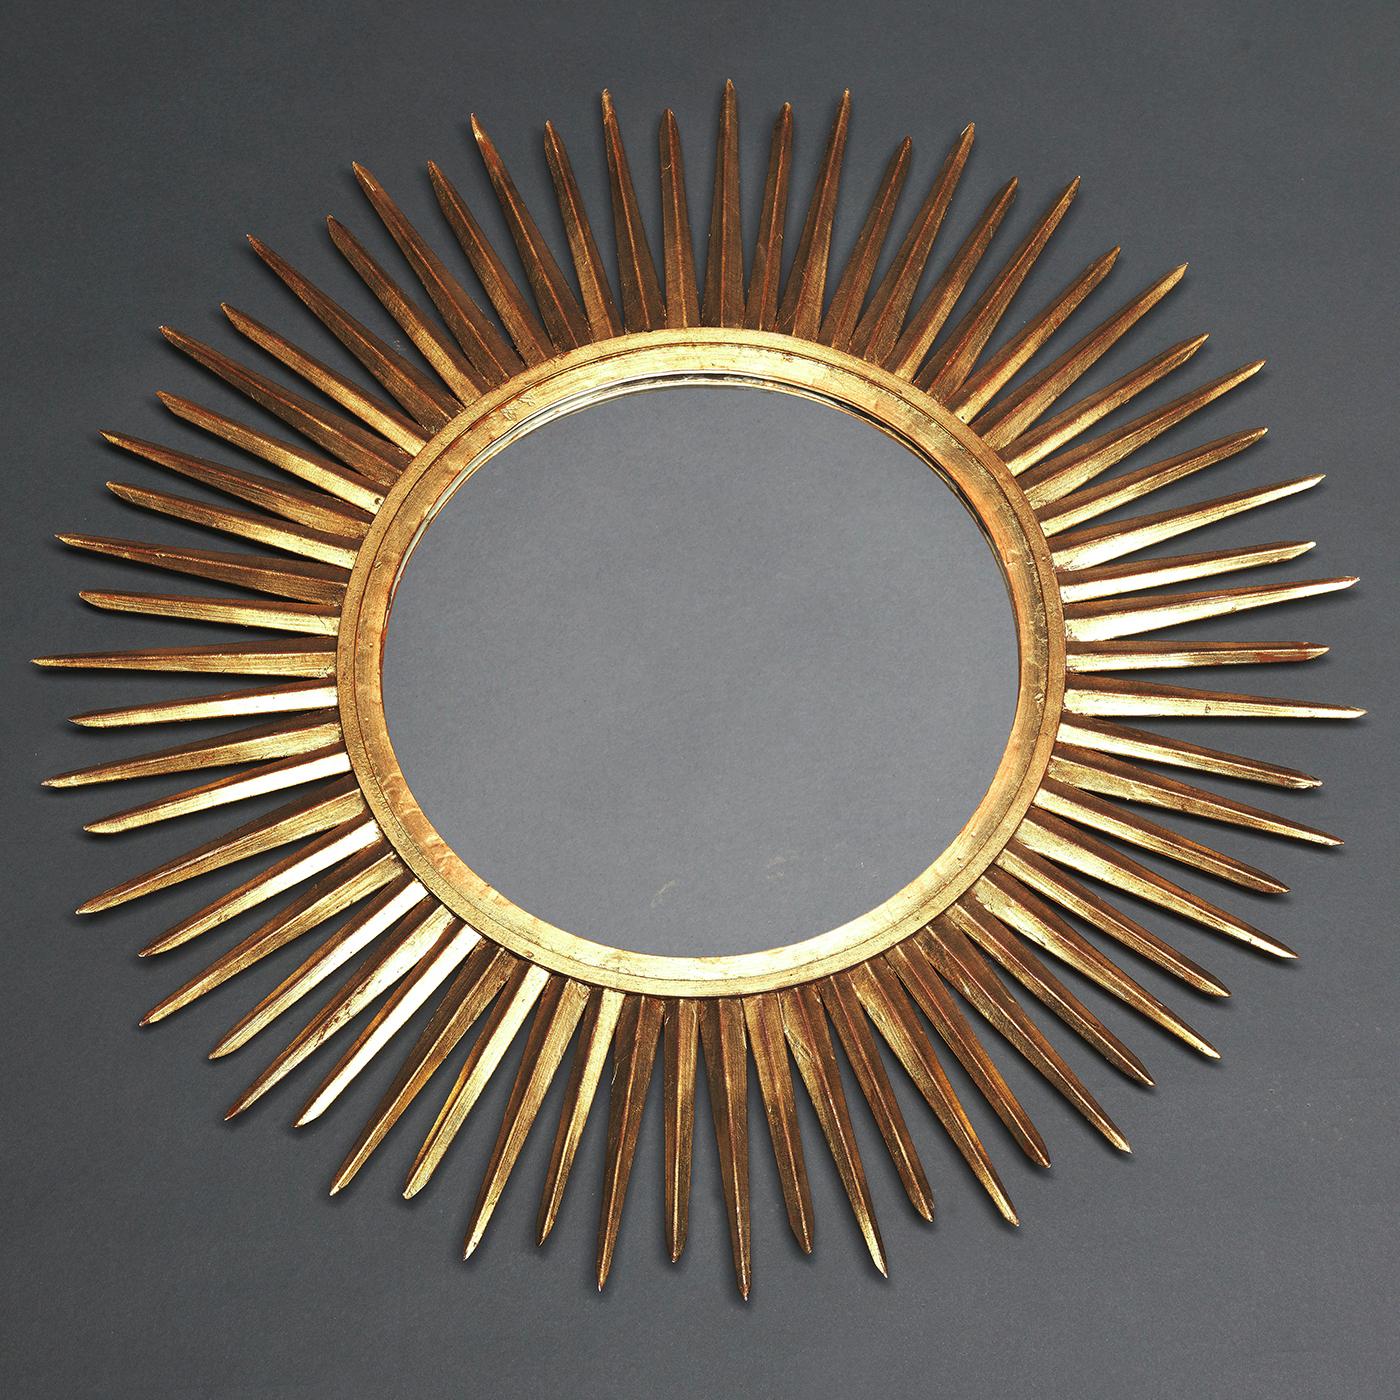 Radiating Renaissance-inspired opulence and timeless allure, this mirror is aptly named after the Italian word for sun. Shaped like the star that illuminates our solar system, this superb piece comprises a round mirror enclosed in a stainless steel